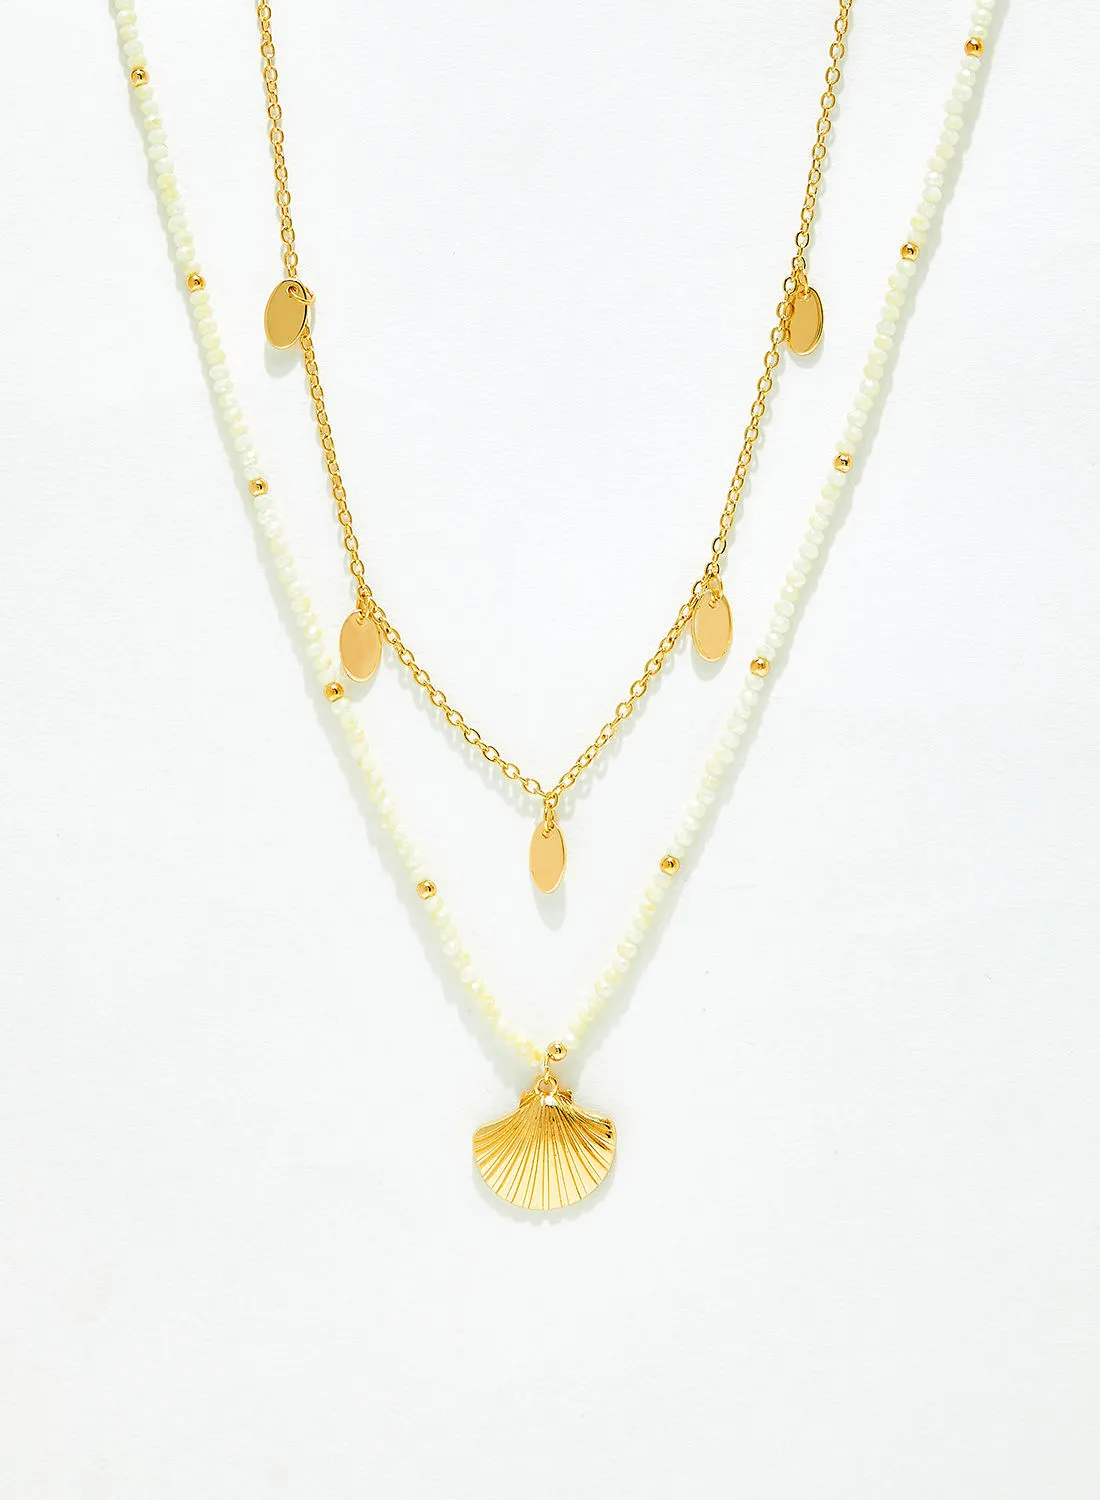 PIECES Seashell Layered Necklace